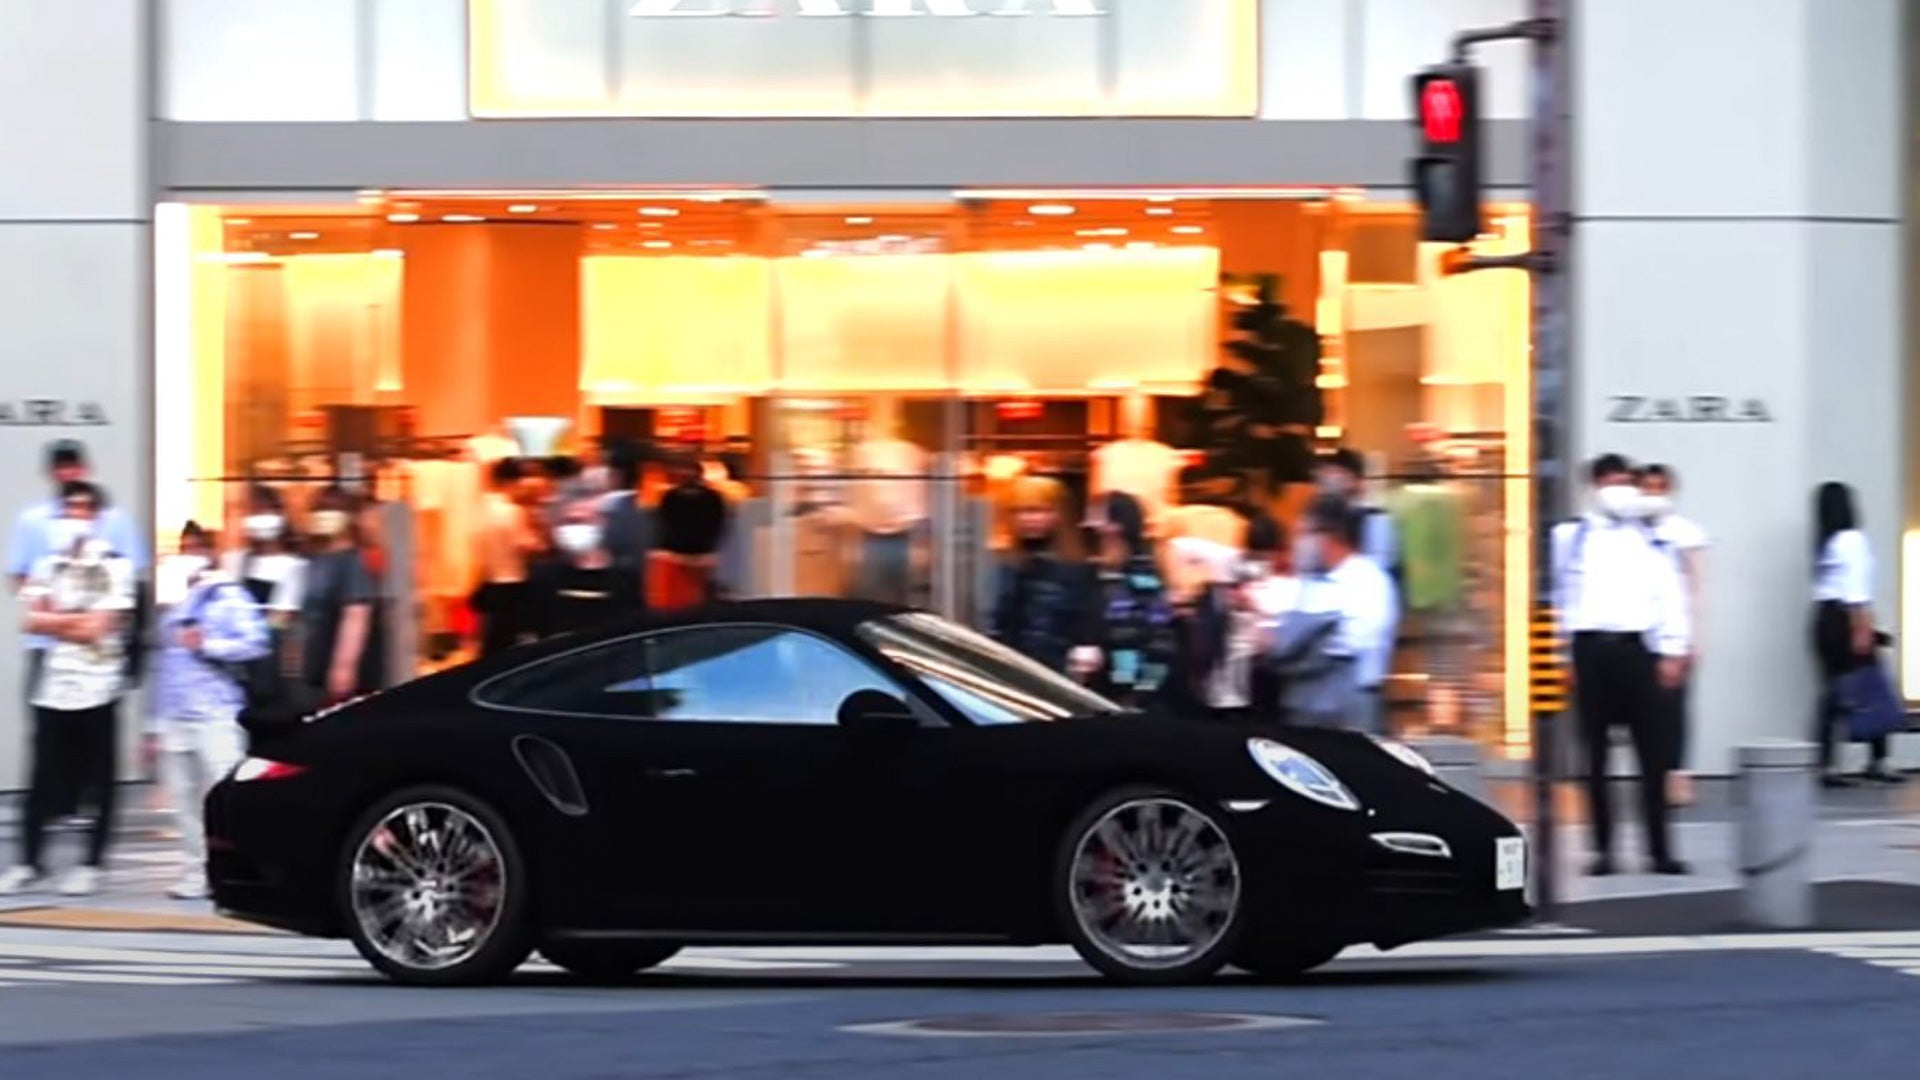 This specially painted Porsche 911 is a rolling black hole for light